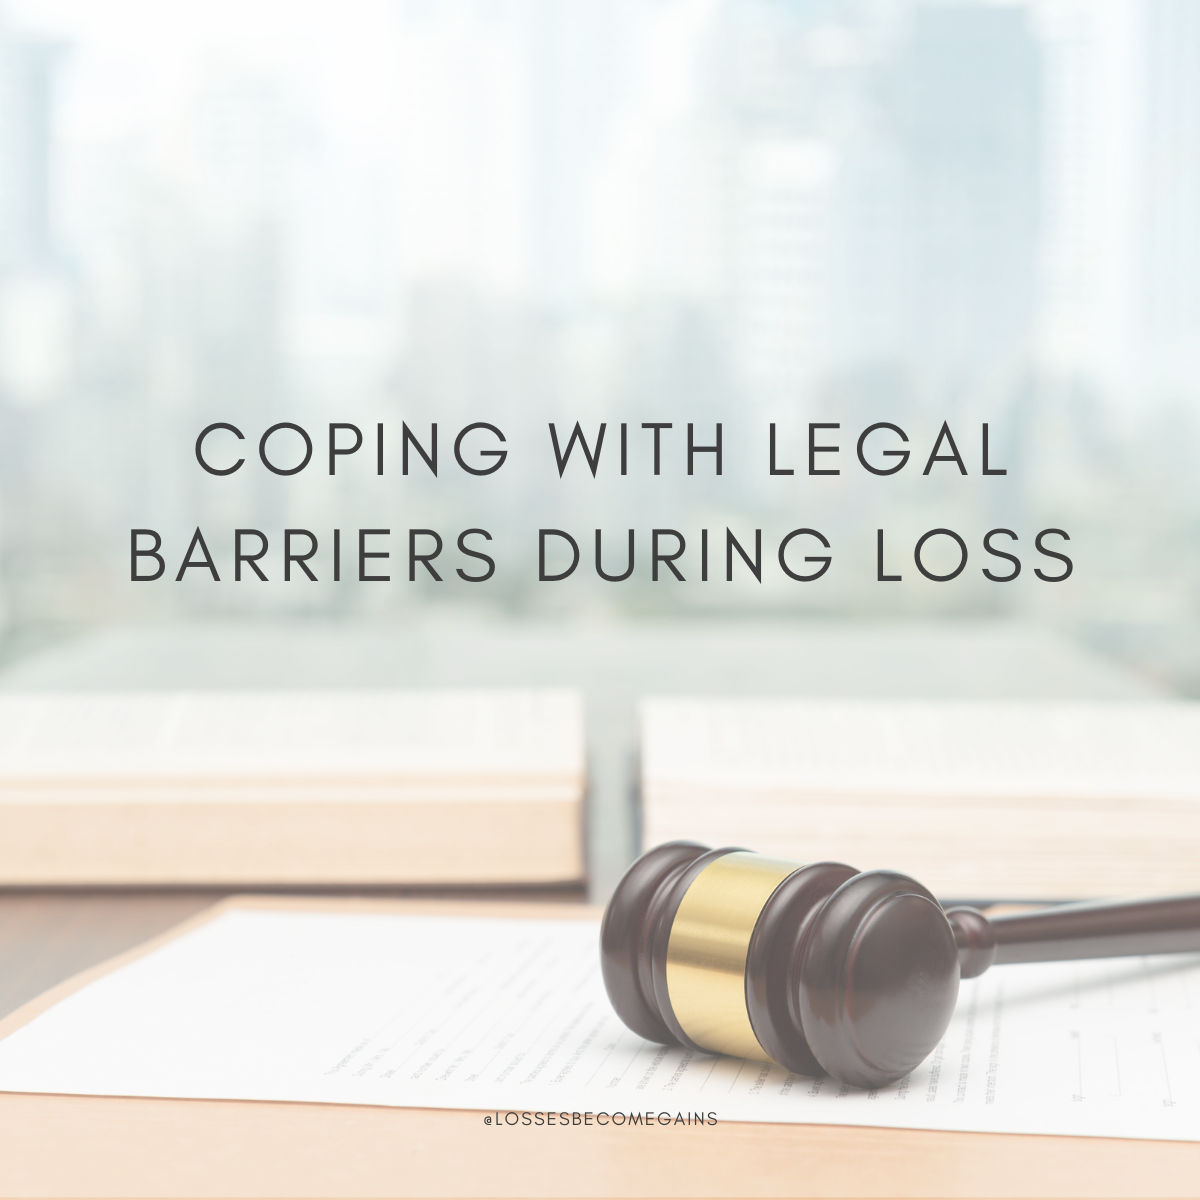 Coping with legal barriers during loss by Losses Become Gains